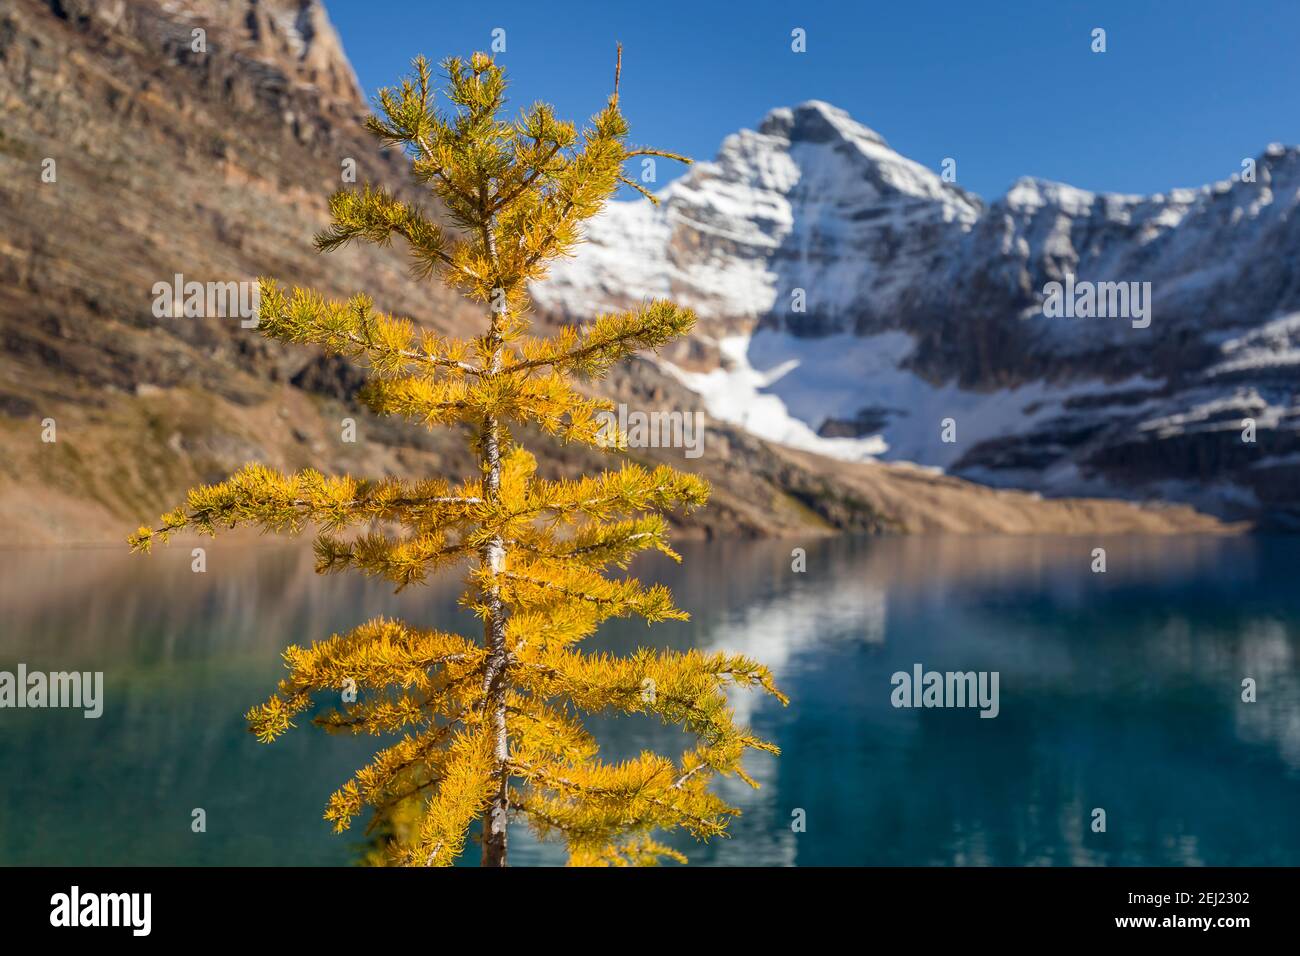 Canadian Rockies landscape of a yellow golden larch during autumn with a blurred background in black and white, lake, mountains with snow, Canada Stock Photo